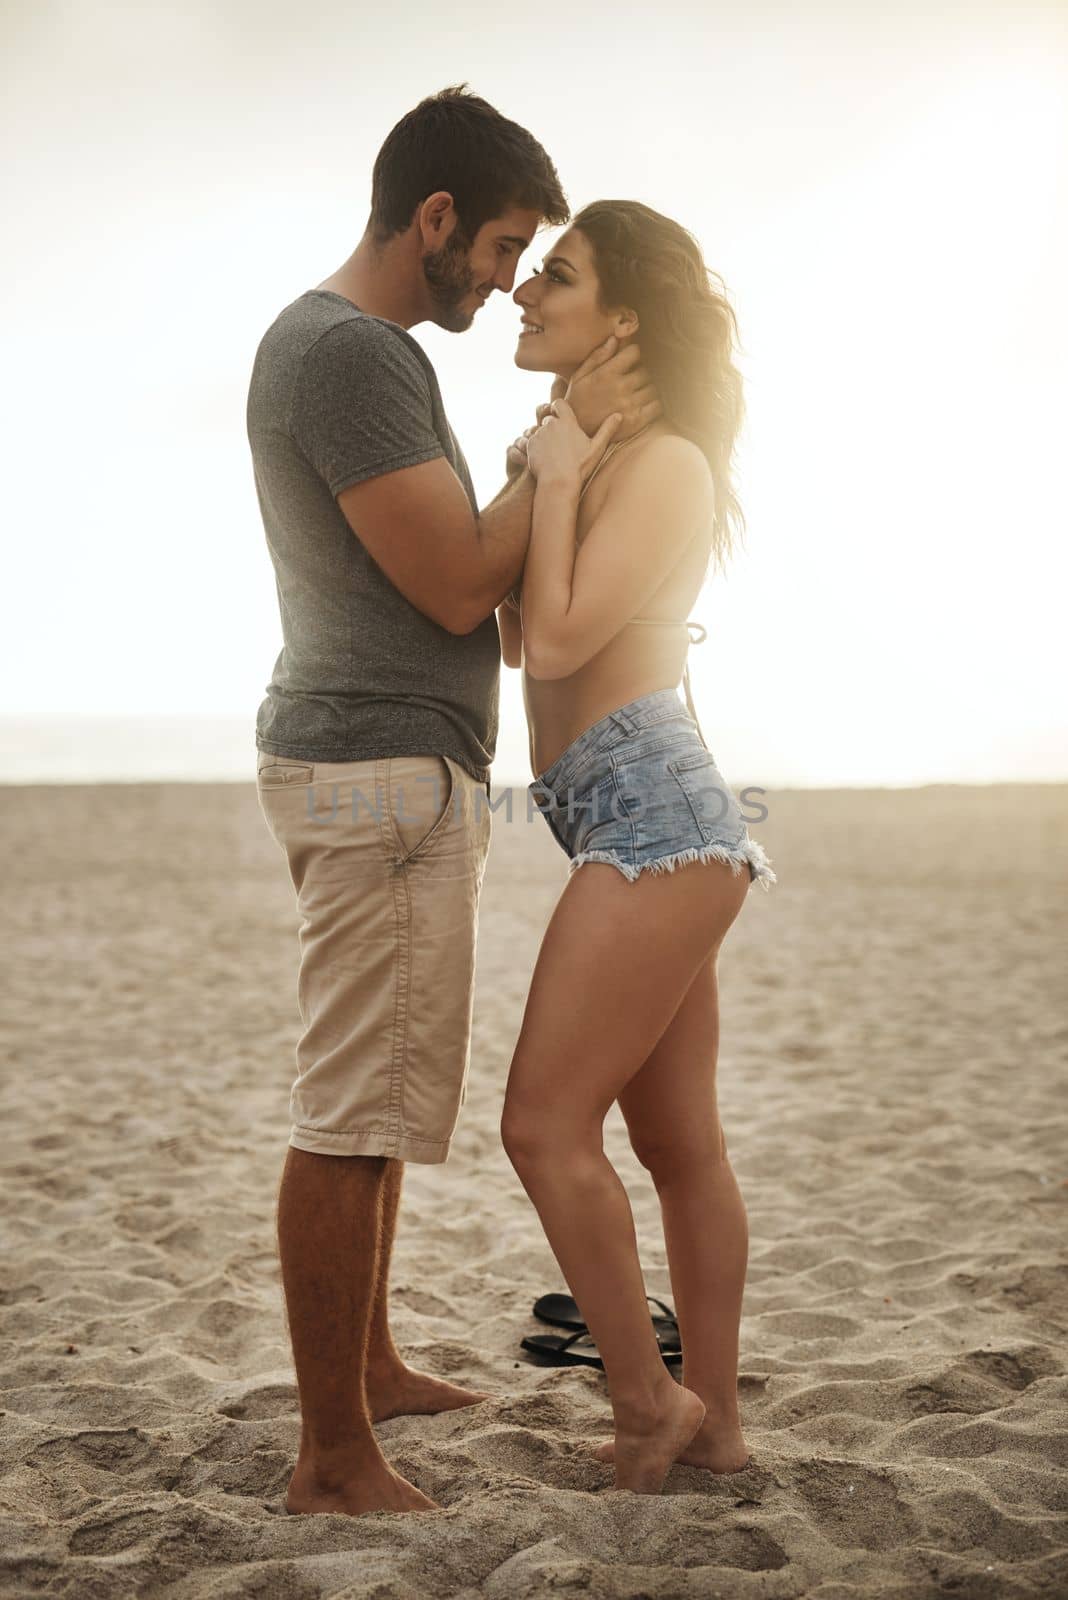 I could spend an eternity loving you. a young couple spending a romantic day at the beach